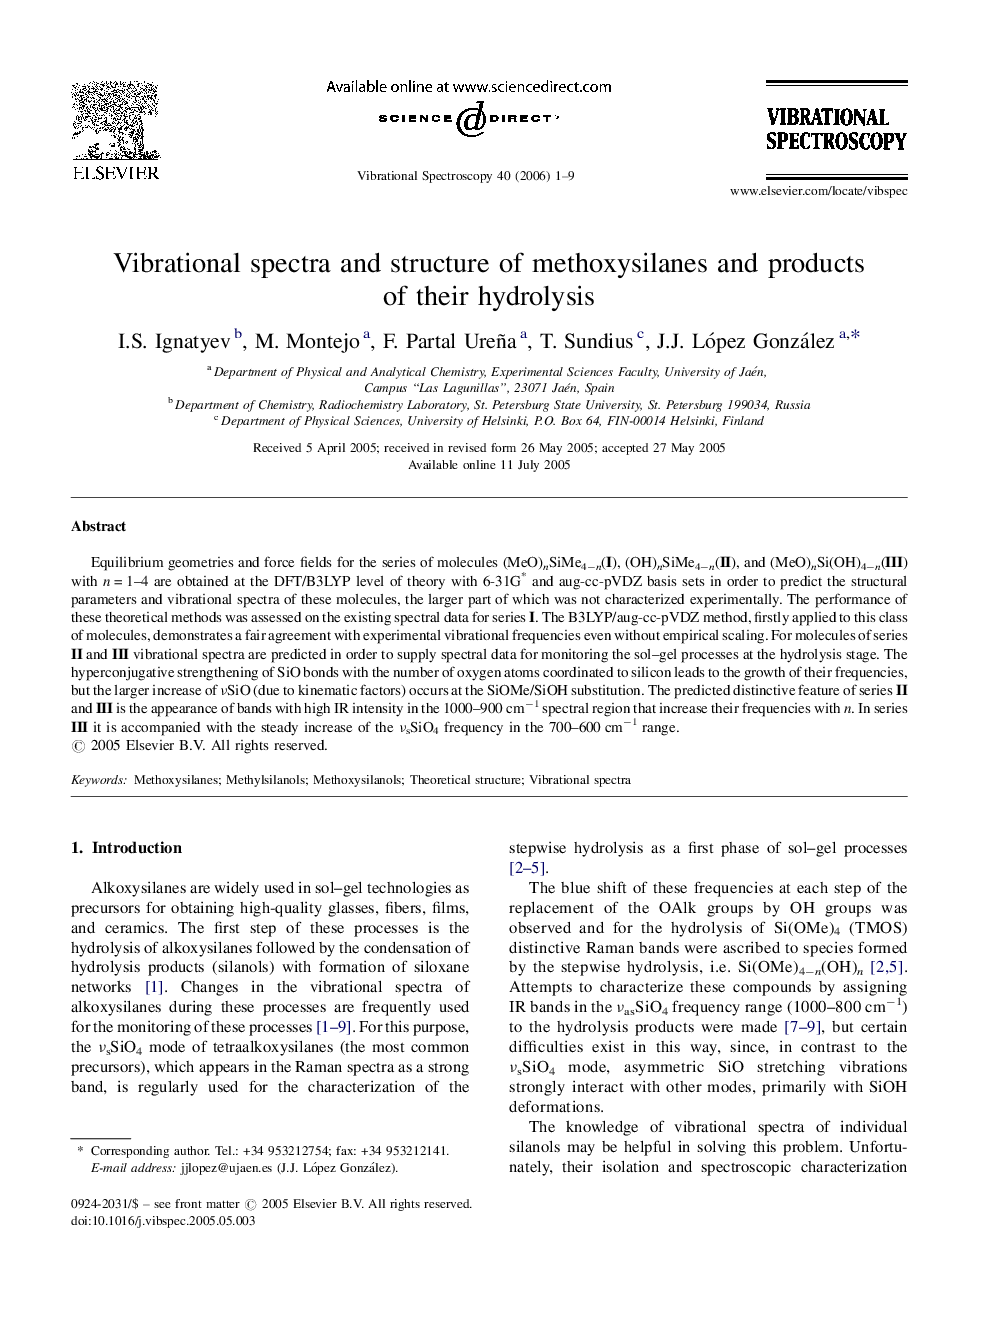 Vibrational spectra and structure of methoxysilanes and products of their hydrolysis